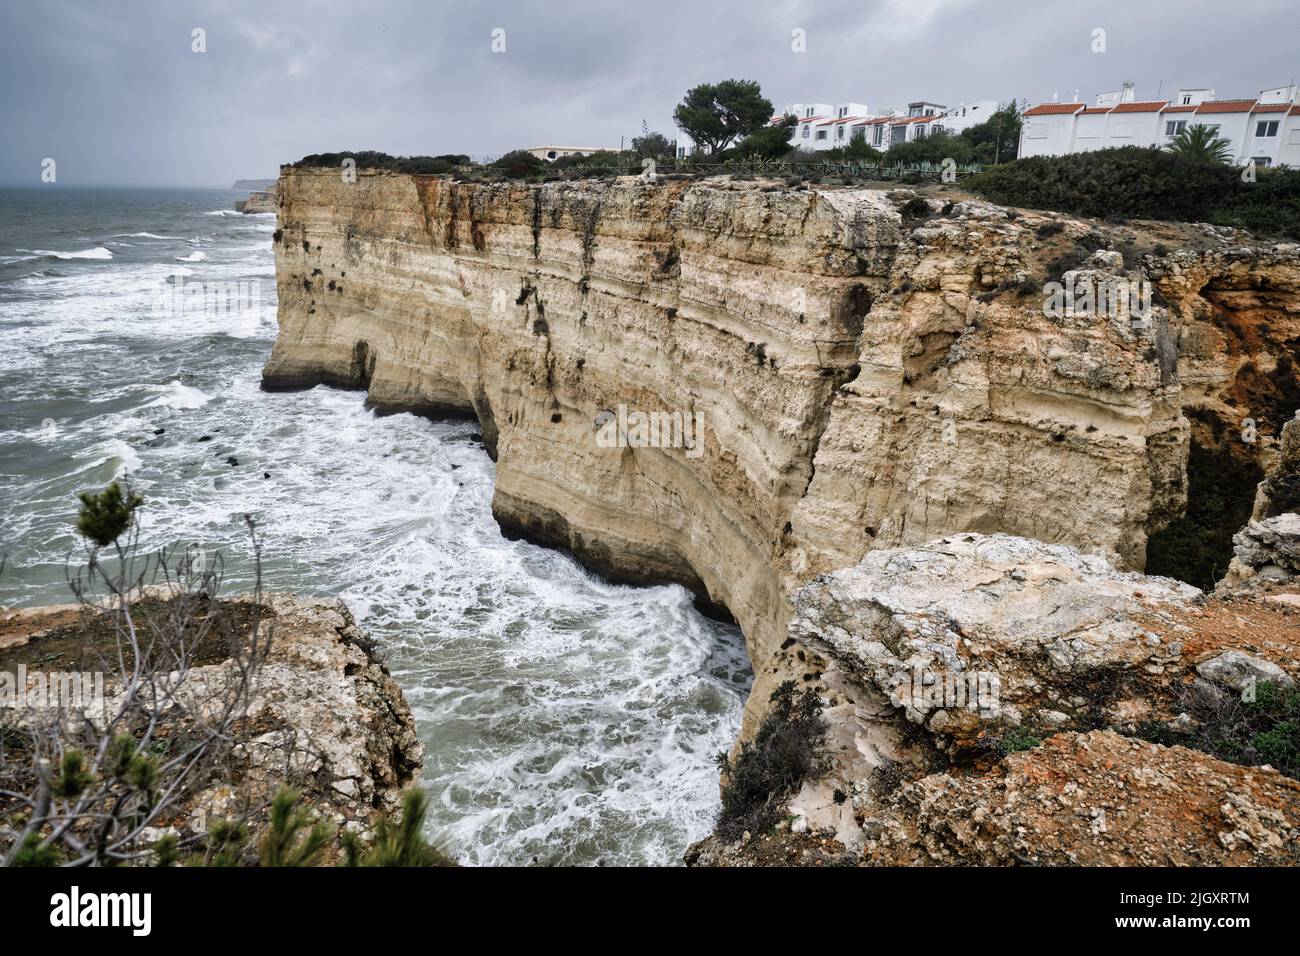 View from the mountain edge to the rocky coastline, moody sky, raging Atlantic Ocean during stormy weather. Portugal, Europe Stock Photo